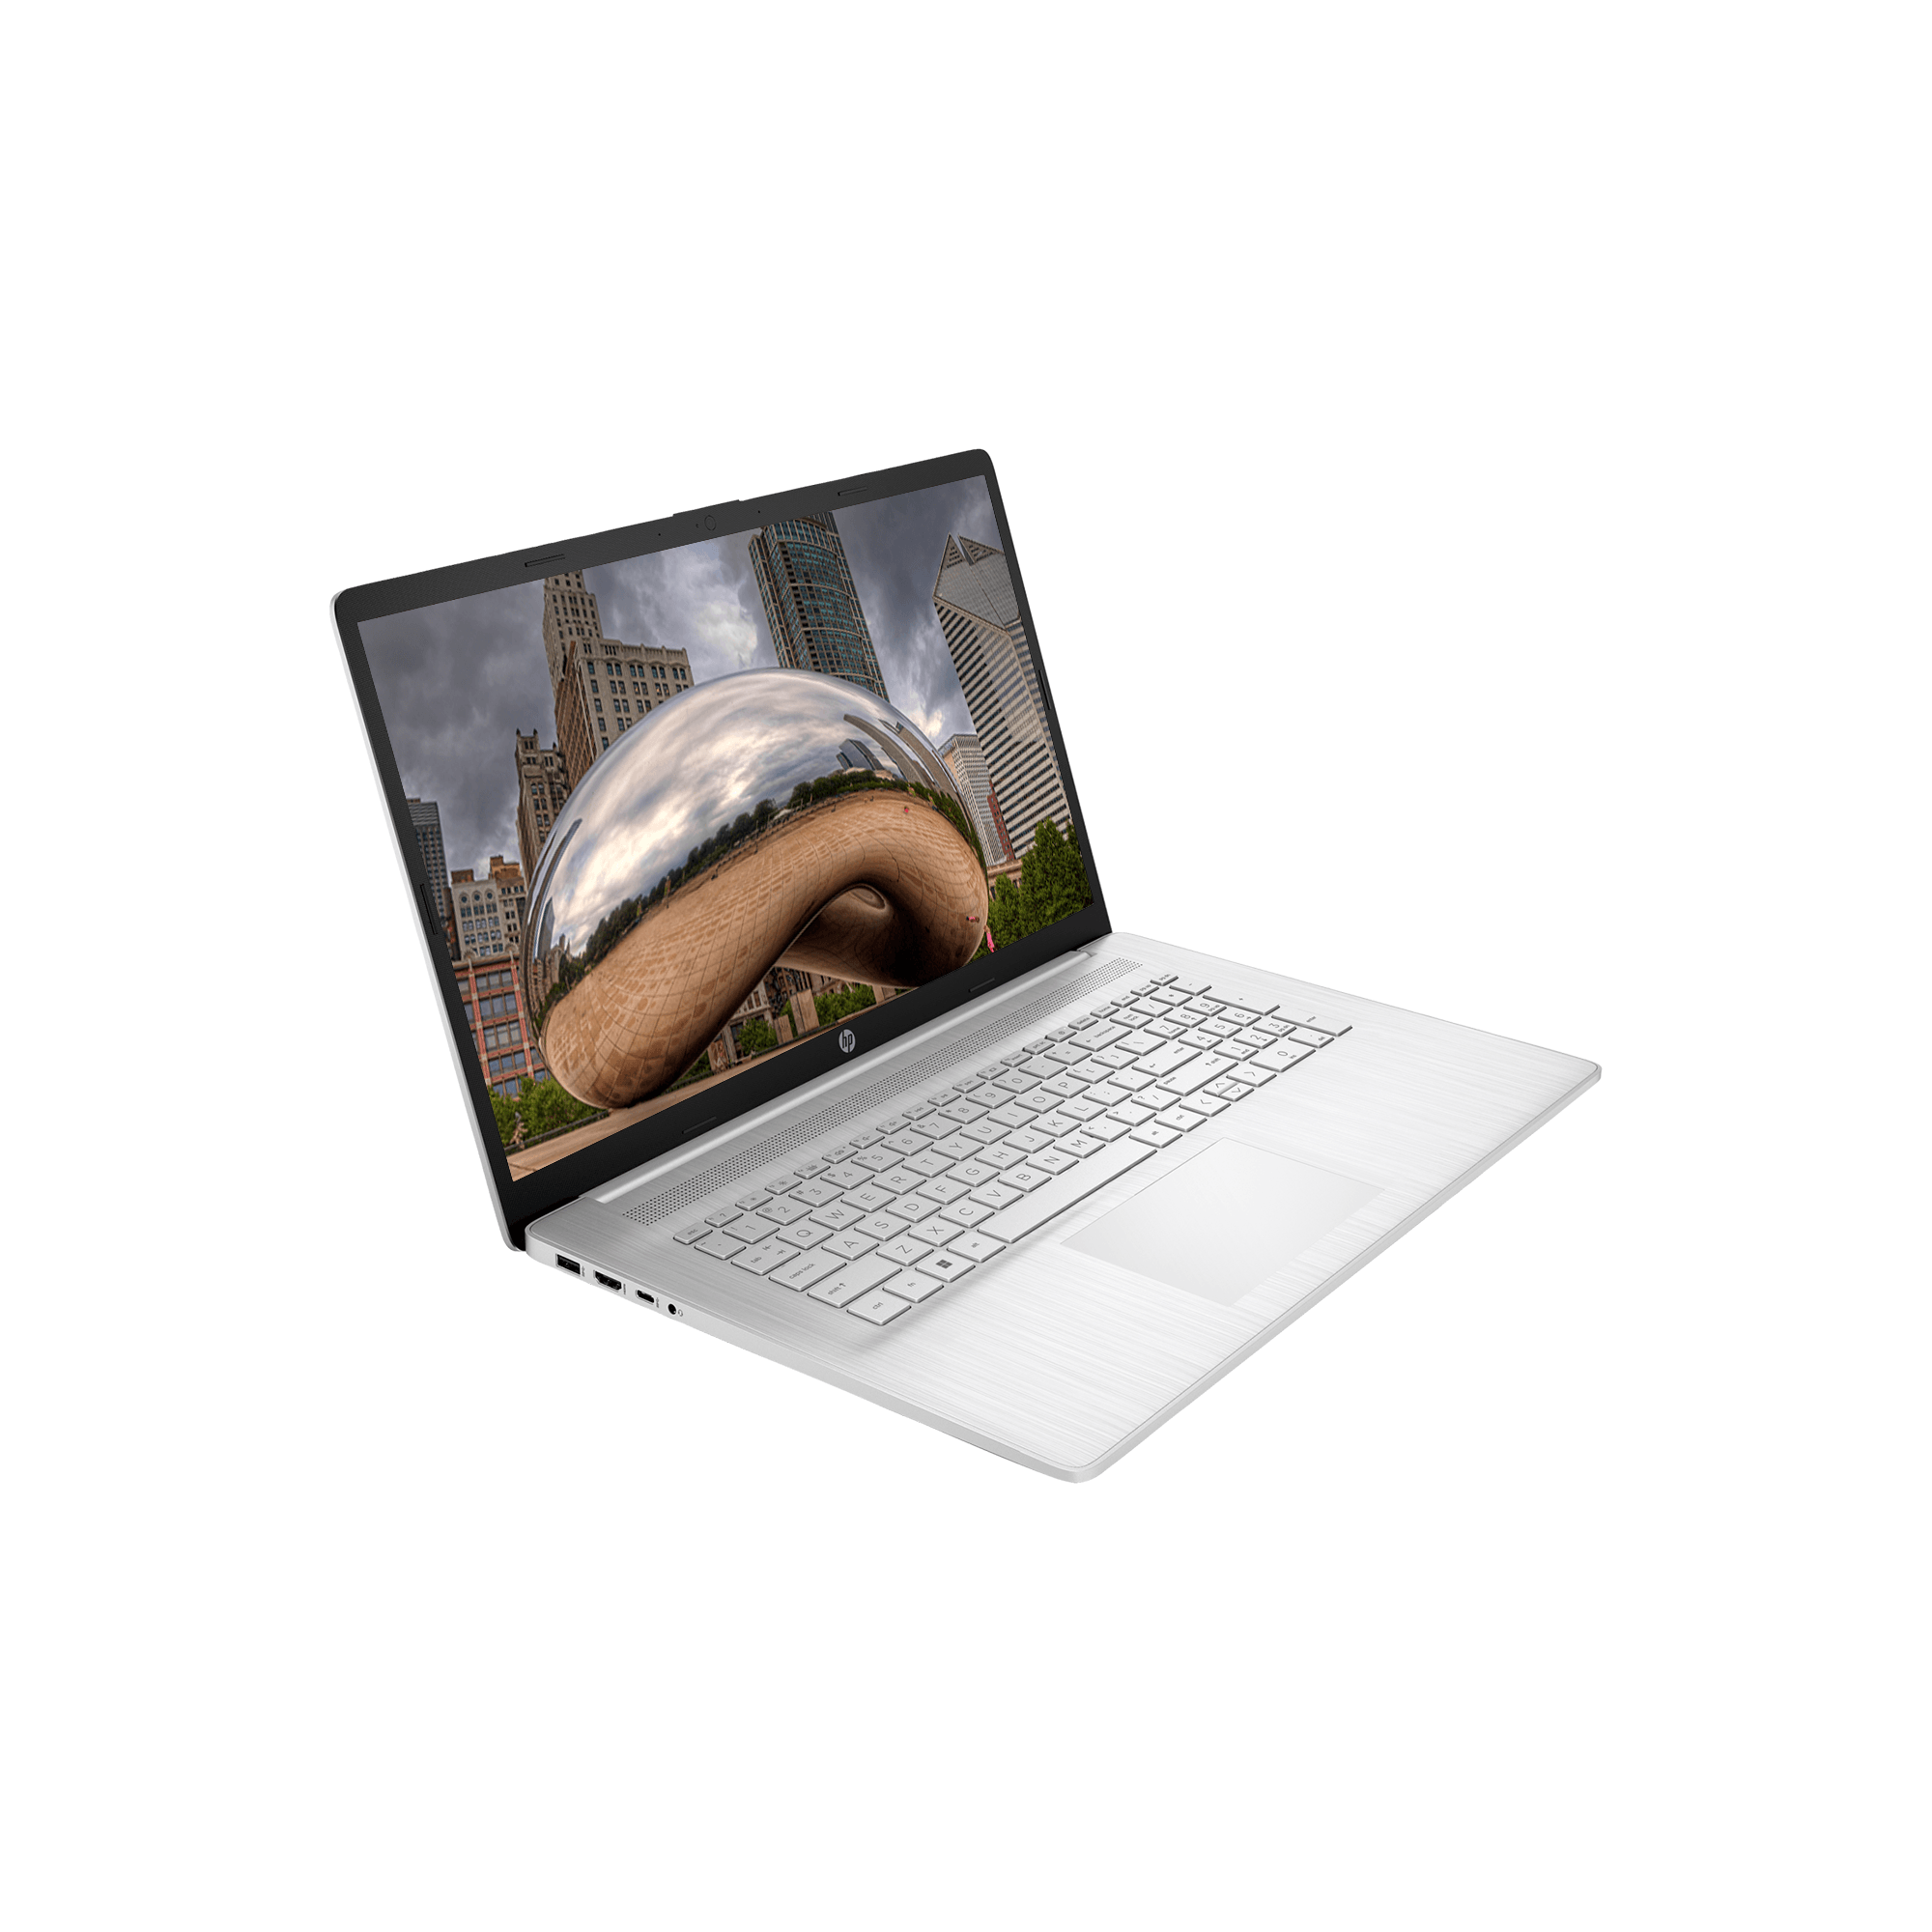 Hp 17t Laptop, Intel Core i7-1165G7, 17.3" HD+ (1600X900) Touch, Windows 11 Home,Silver